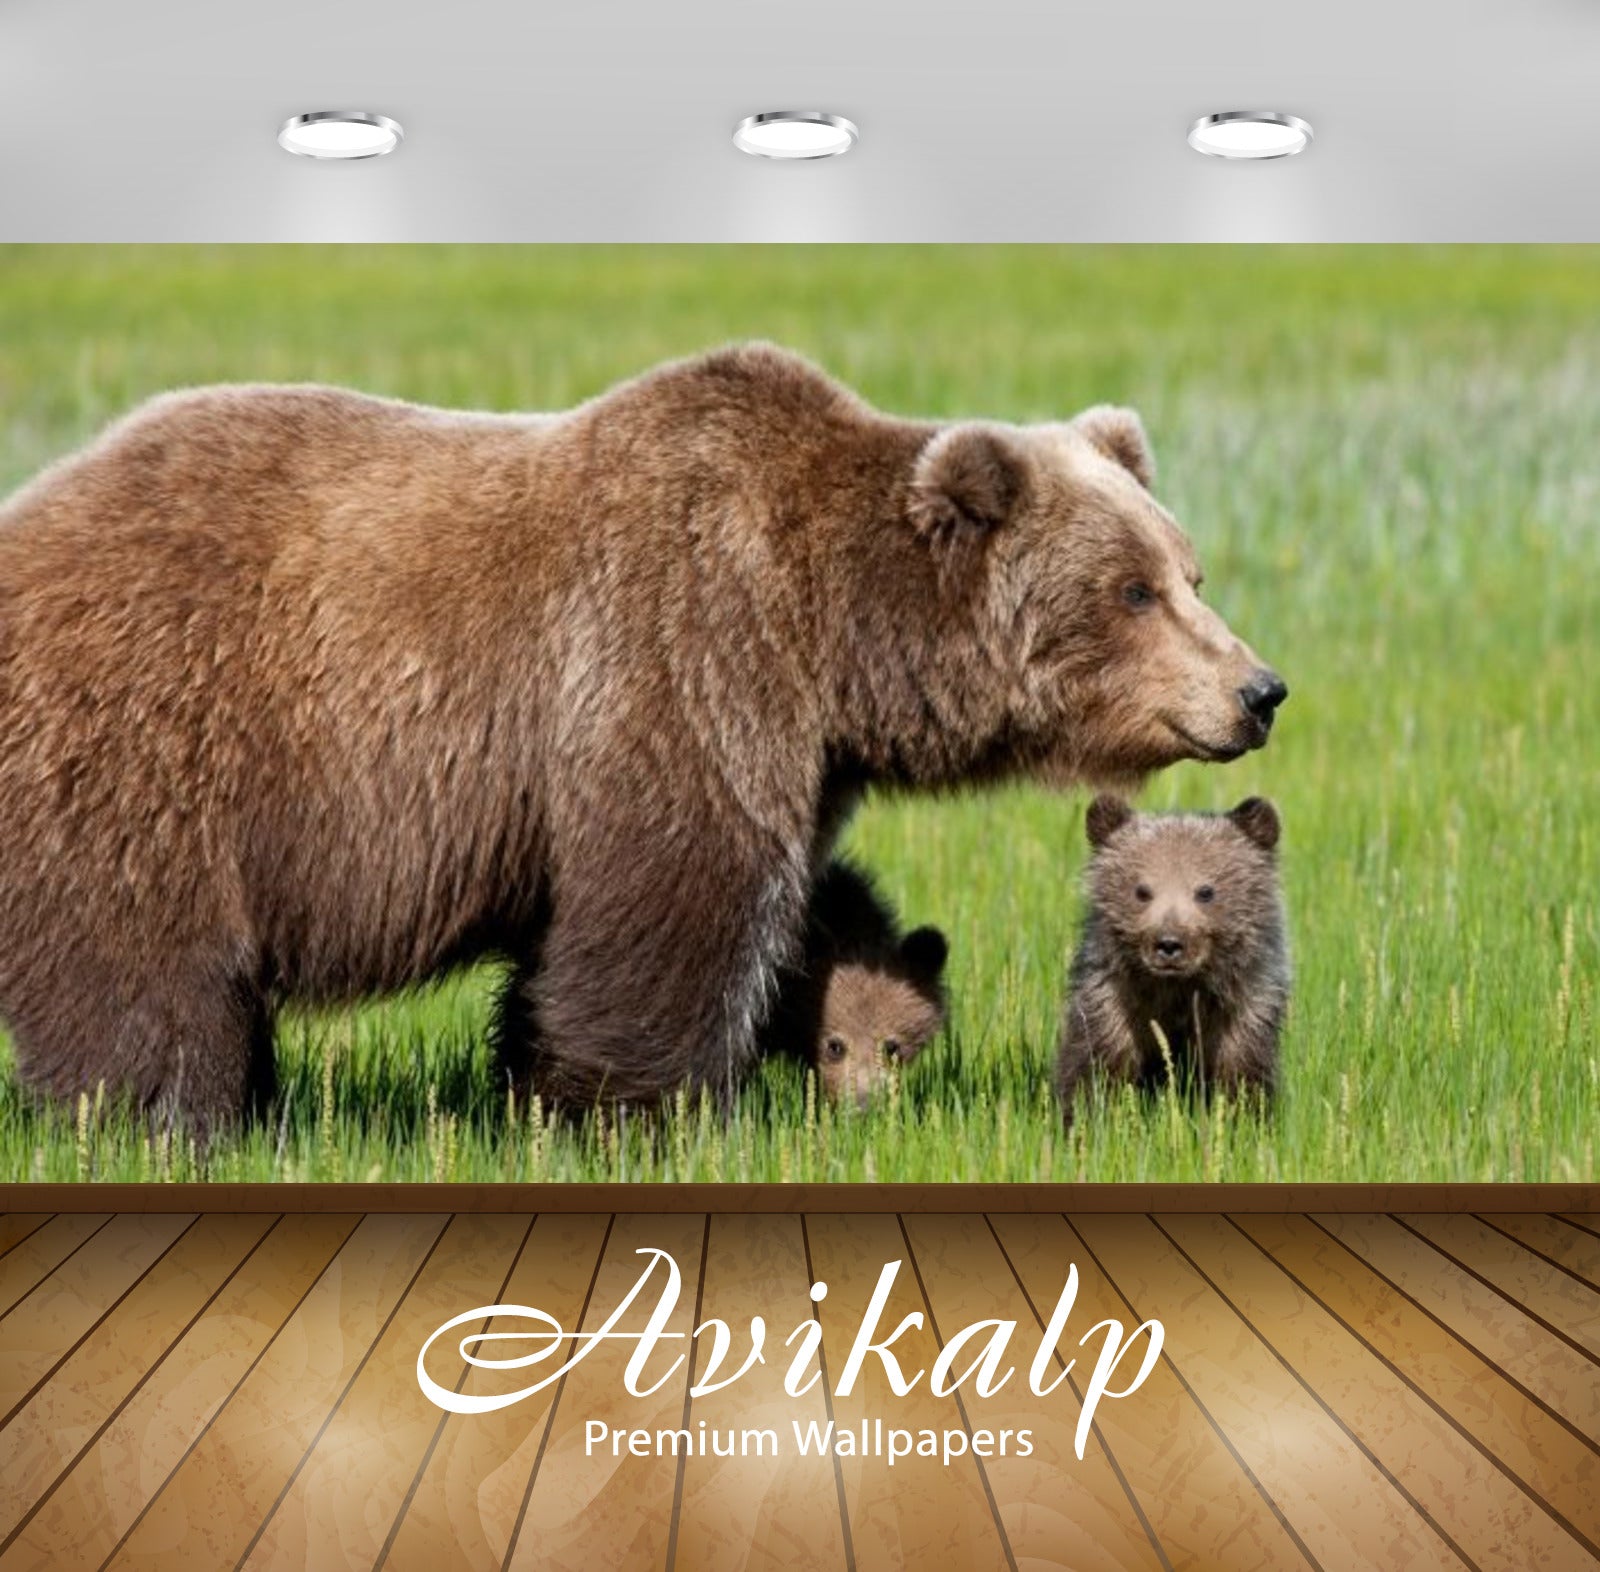 Avikalp Exclusive Awi2419 Bear With Two Young Cubs In A Field Of Green Grass Full HD Wallpapers for